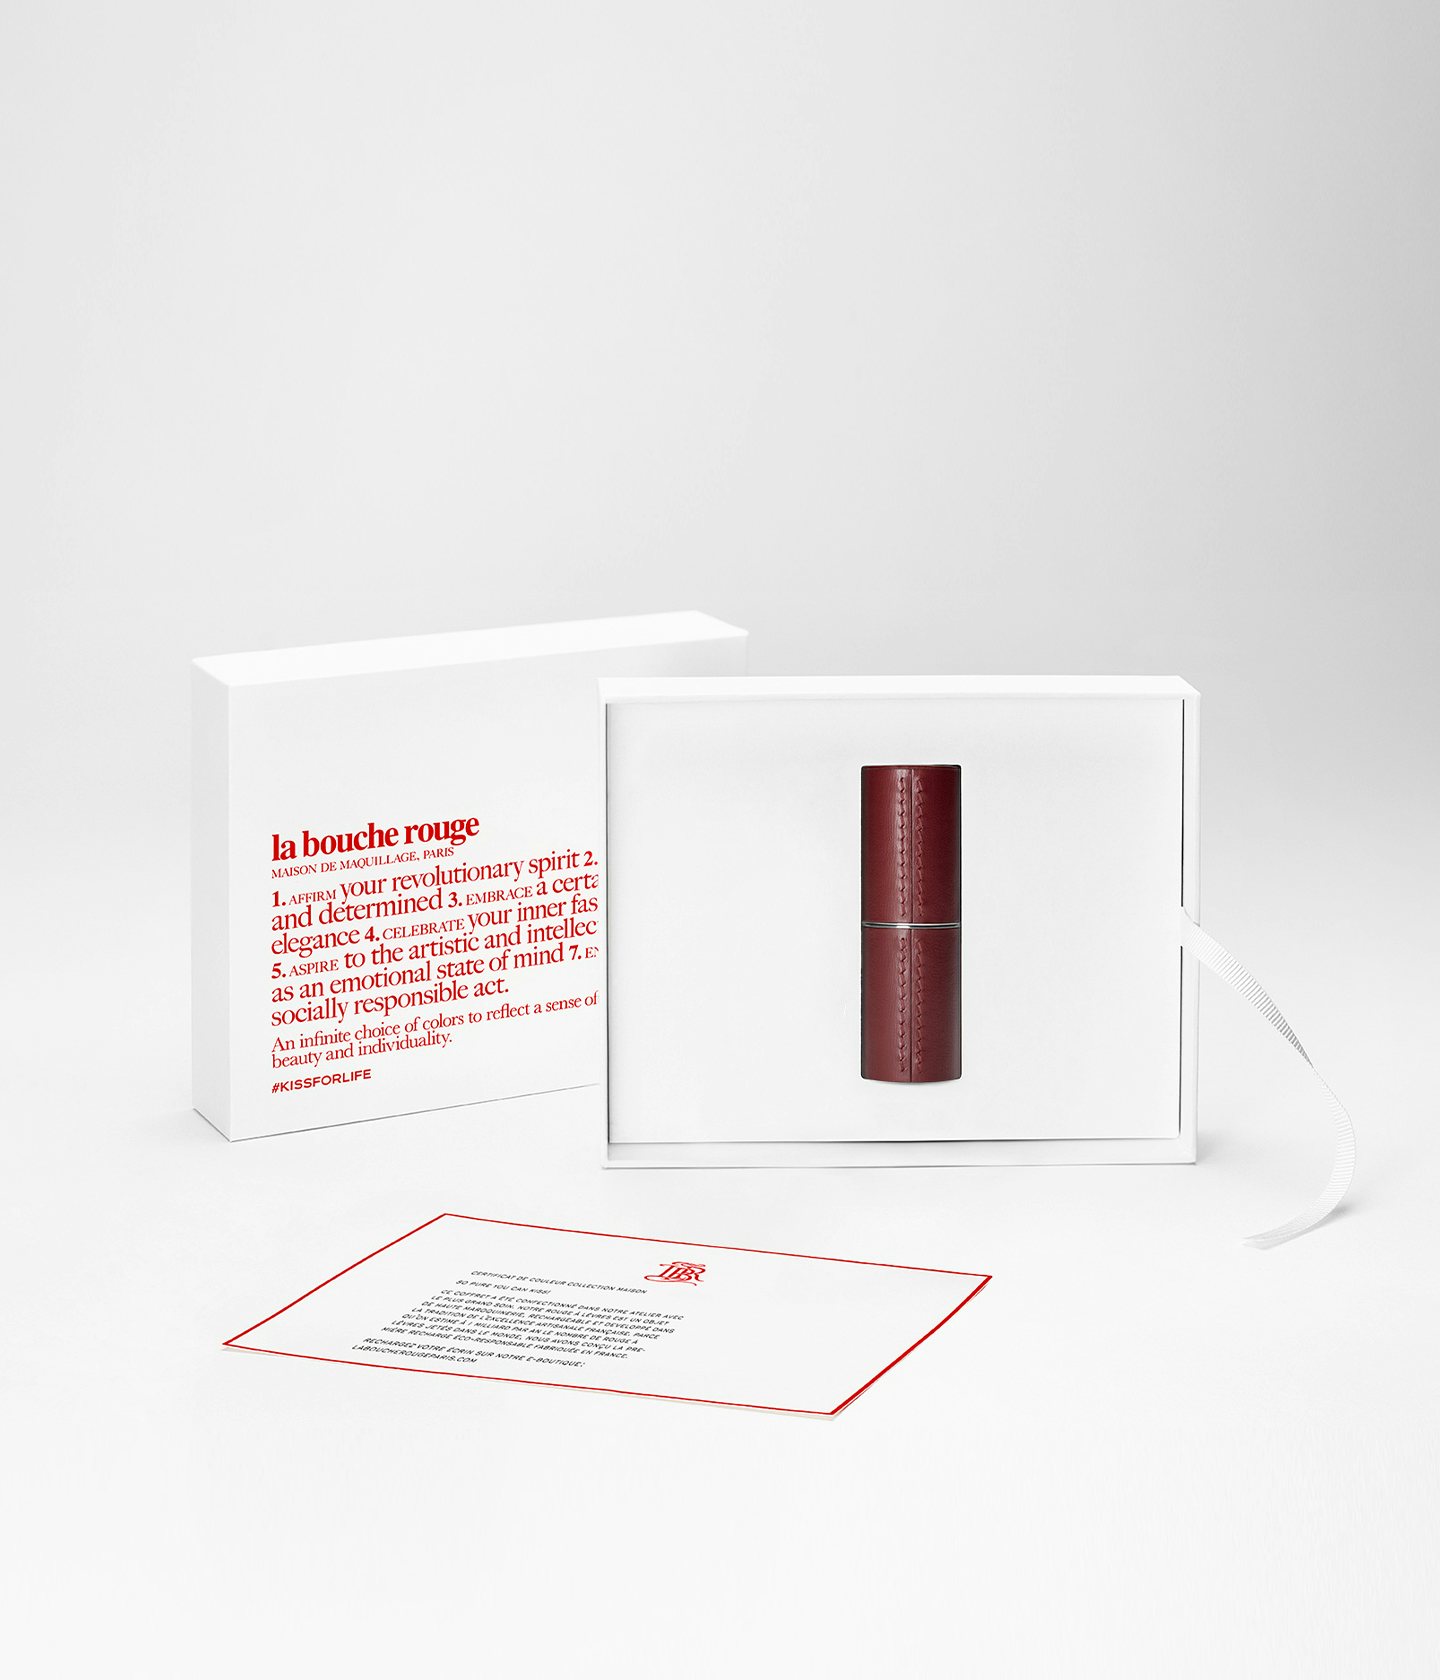 La bouche rouge Chocolate fine leather case in the Manifesto packaging